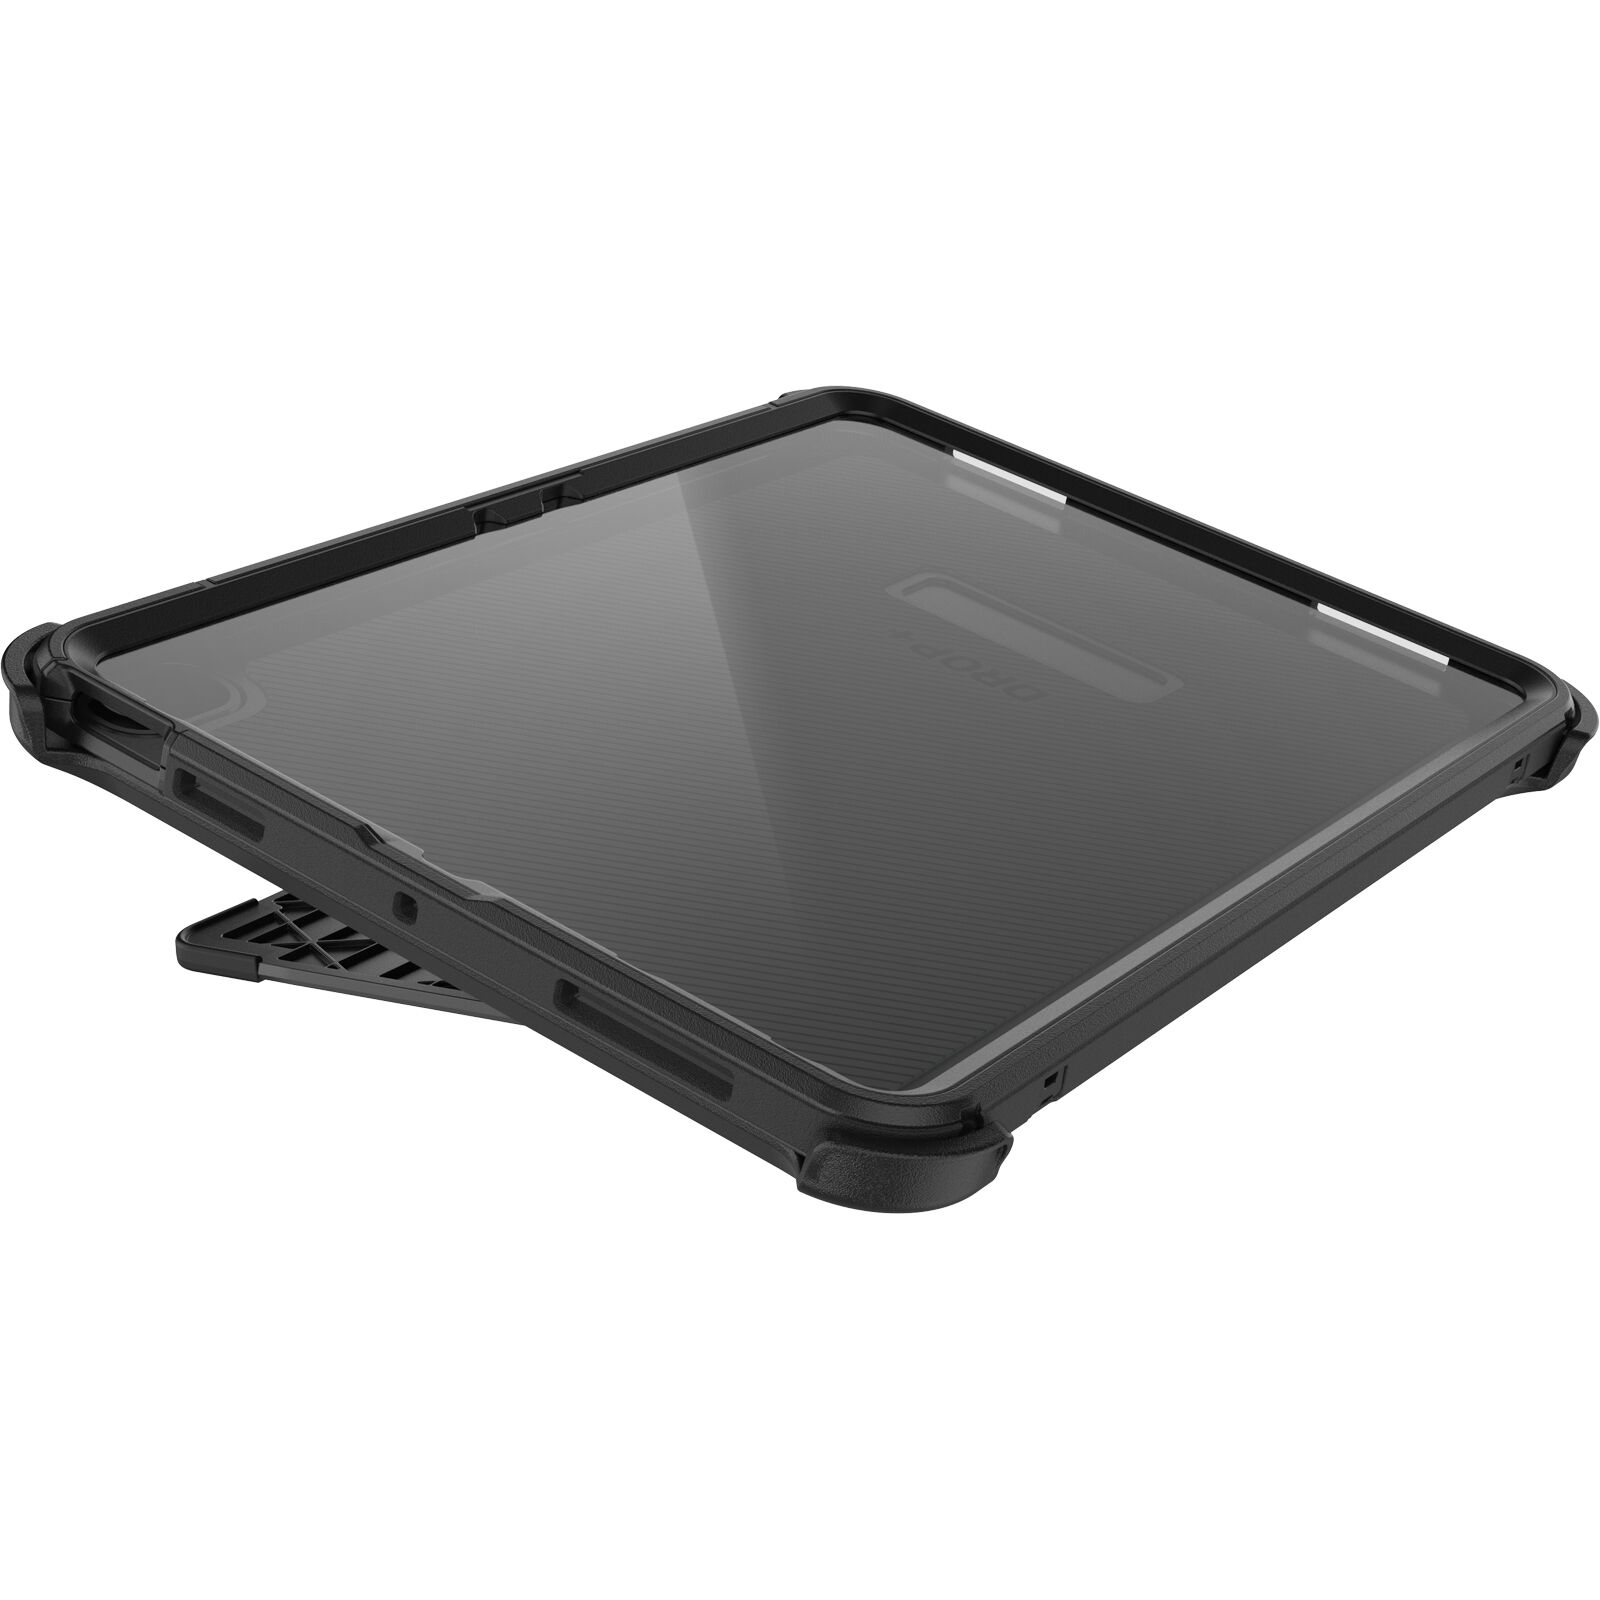 Black Protective iPad Air 11-inch (M2) Case | OtterBox